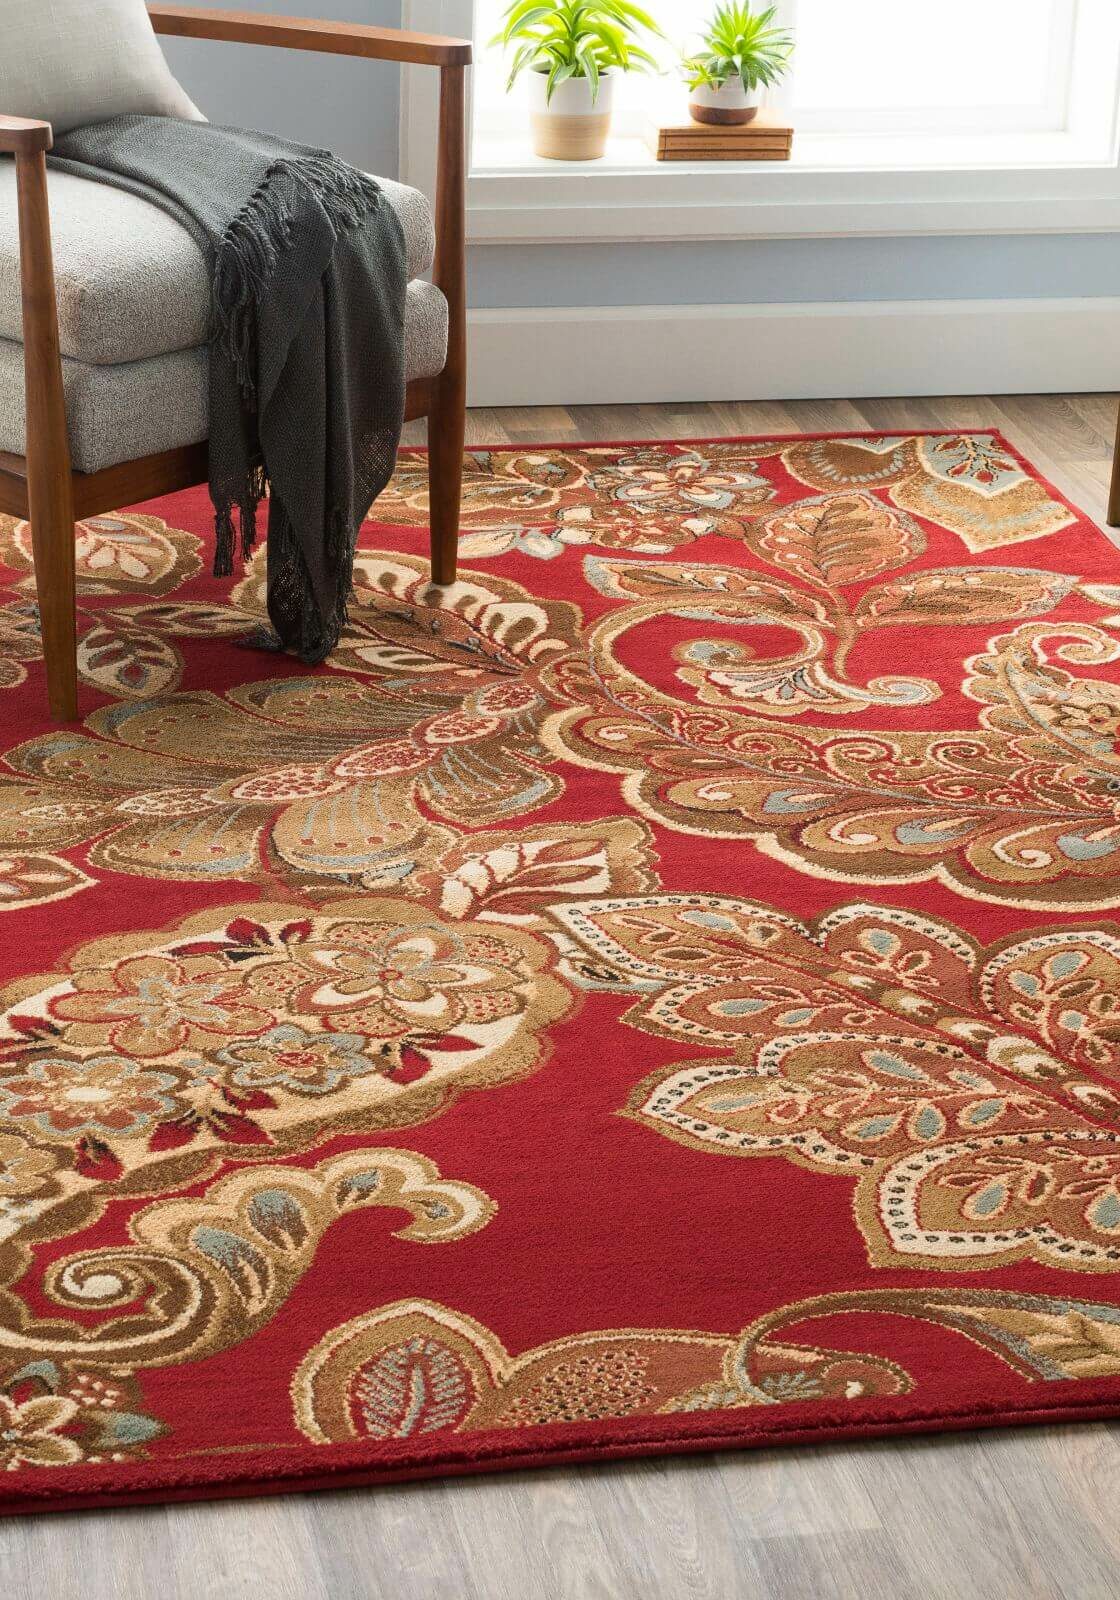 Classic Area Rugs | Great Floors